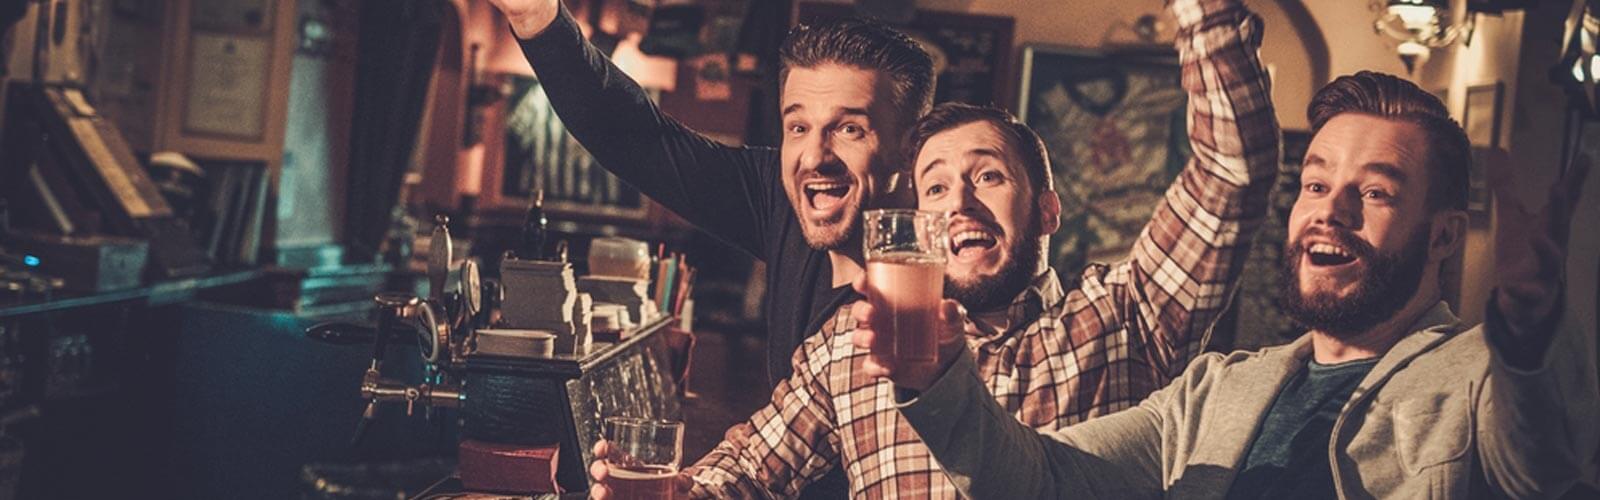 Glasgow stag do guide